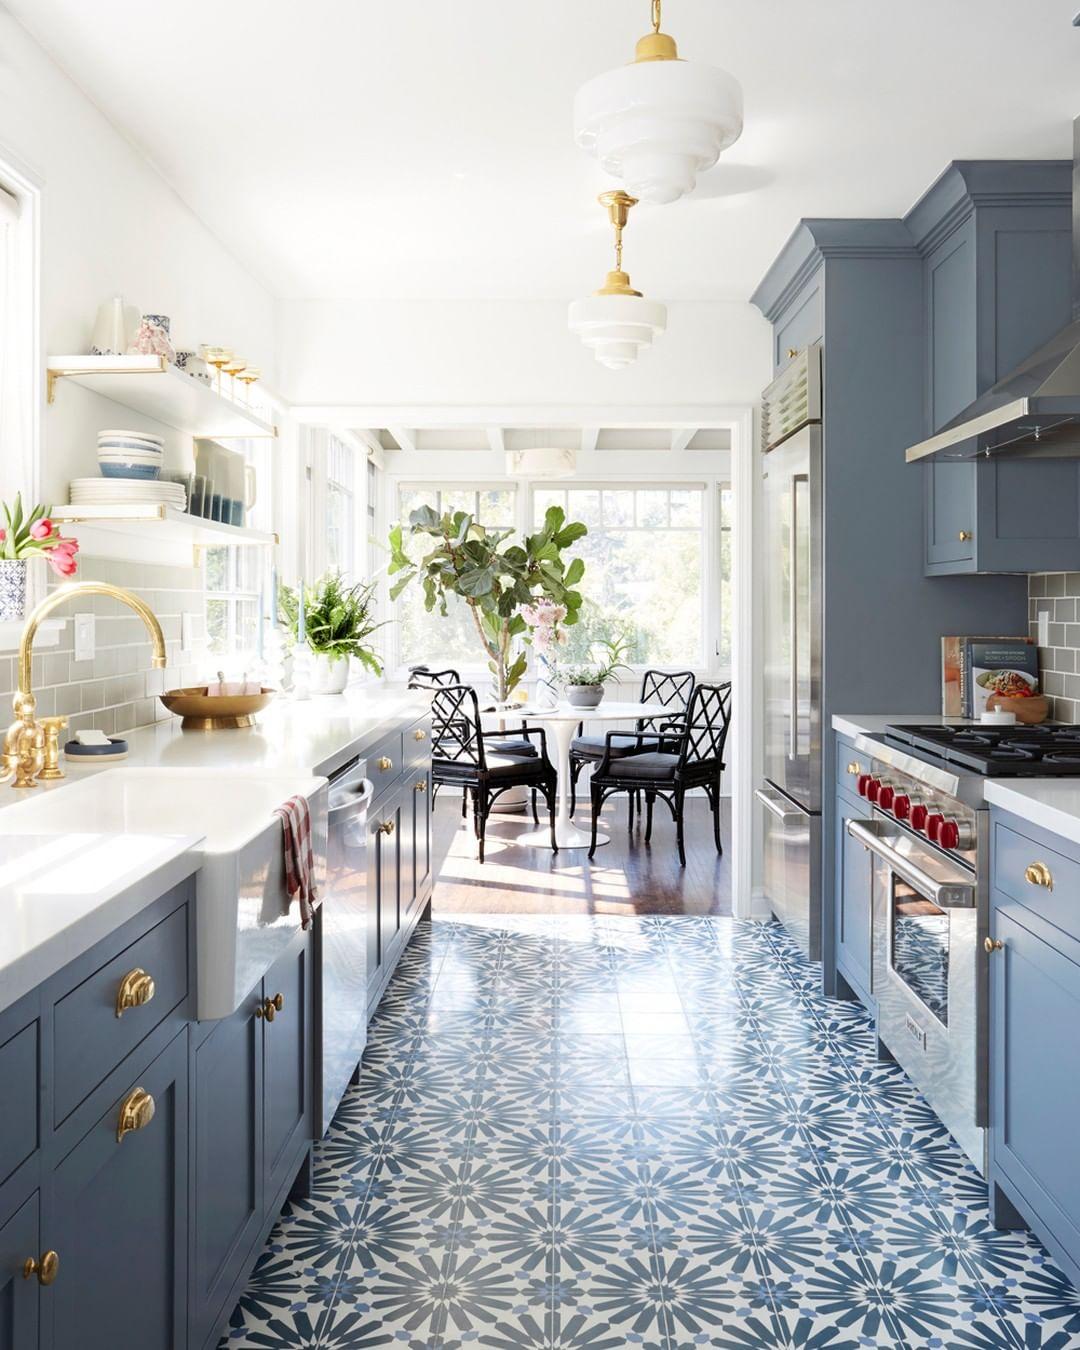 How to Create an Instagram-Worthy Kitchen - open flow to dining area